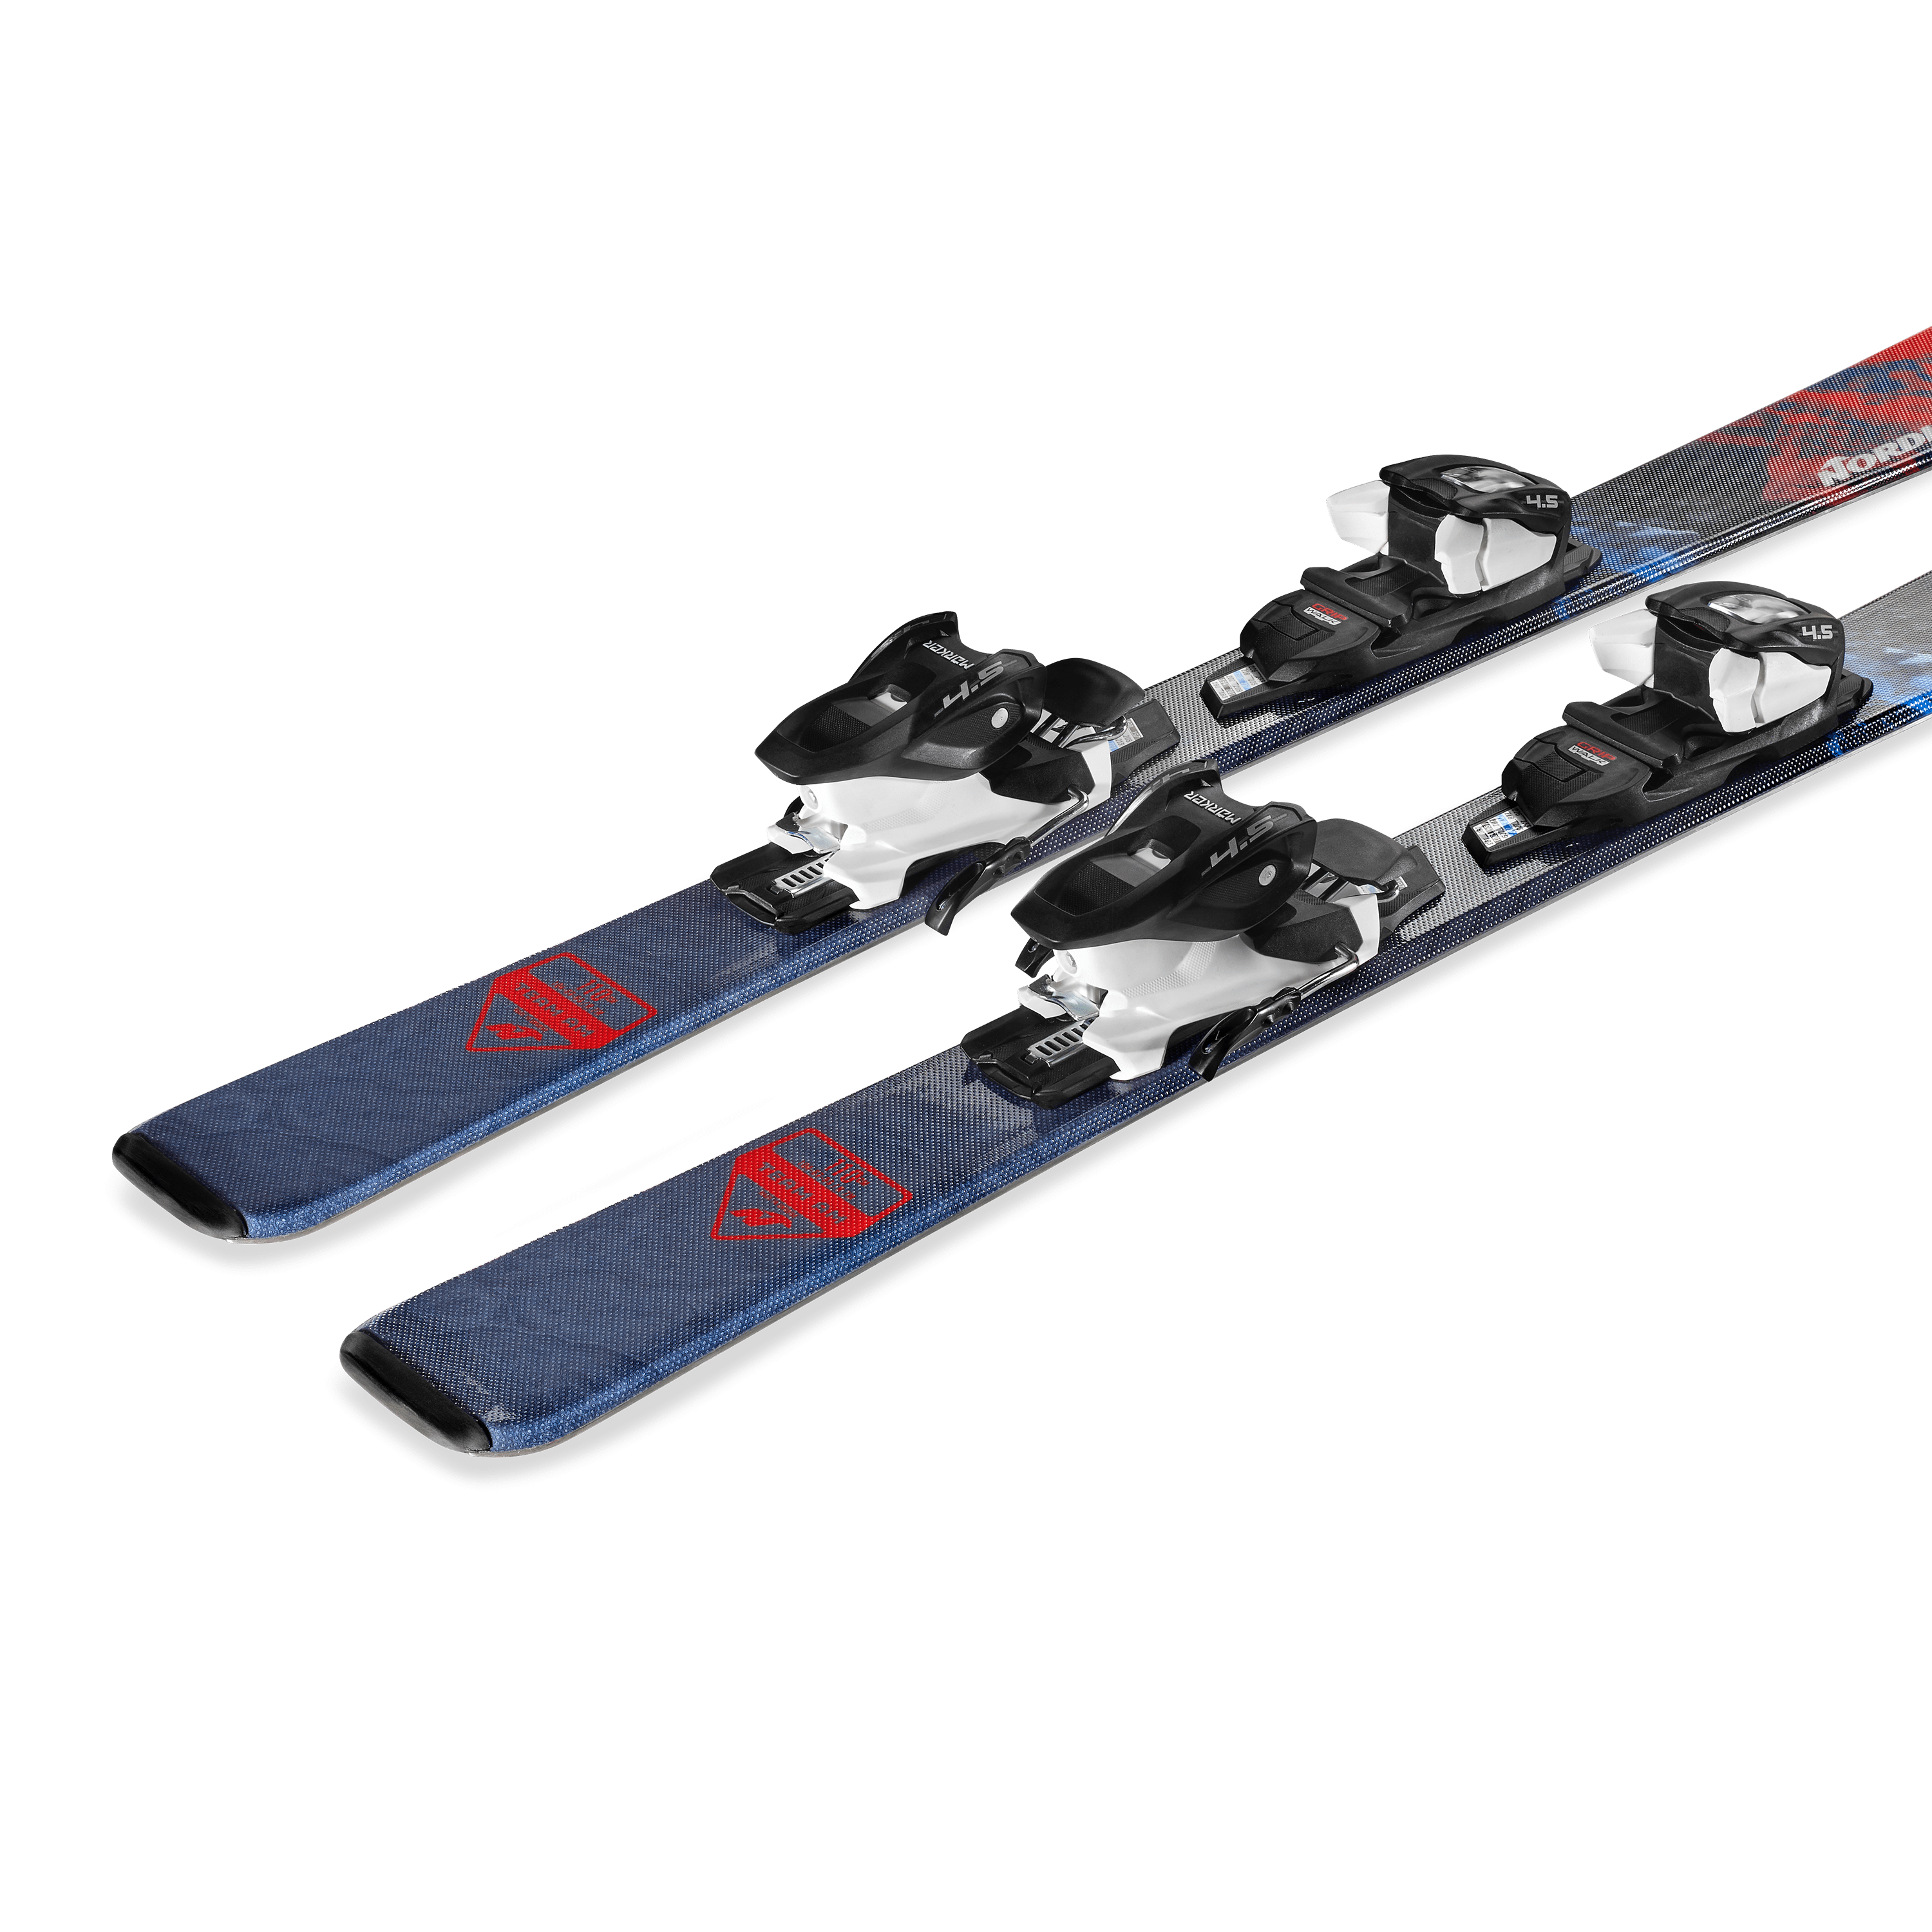 Picture of the Nordica Team am fdt (110-150) skis.